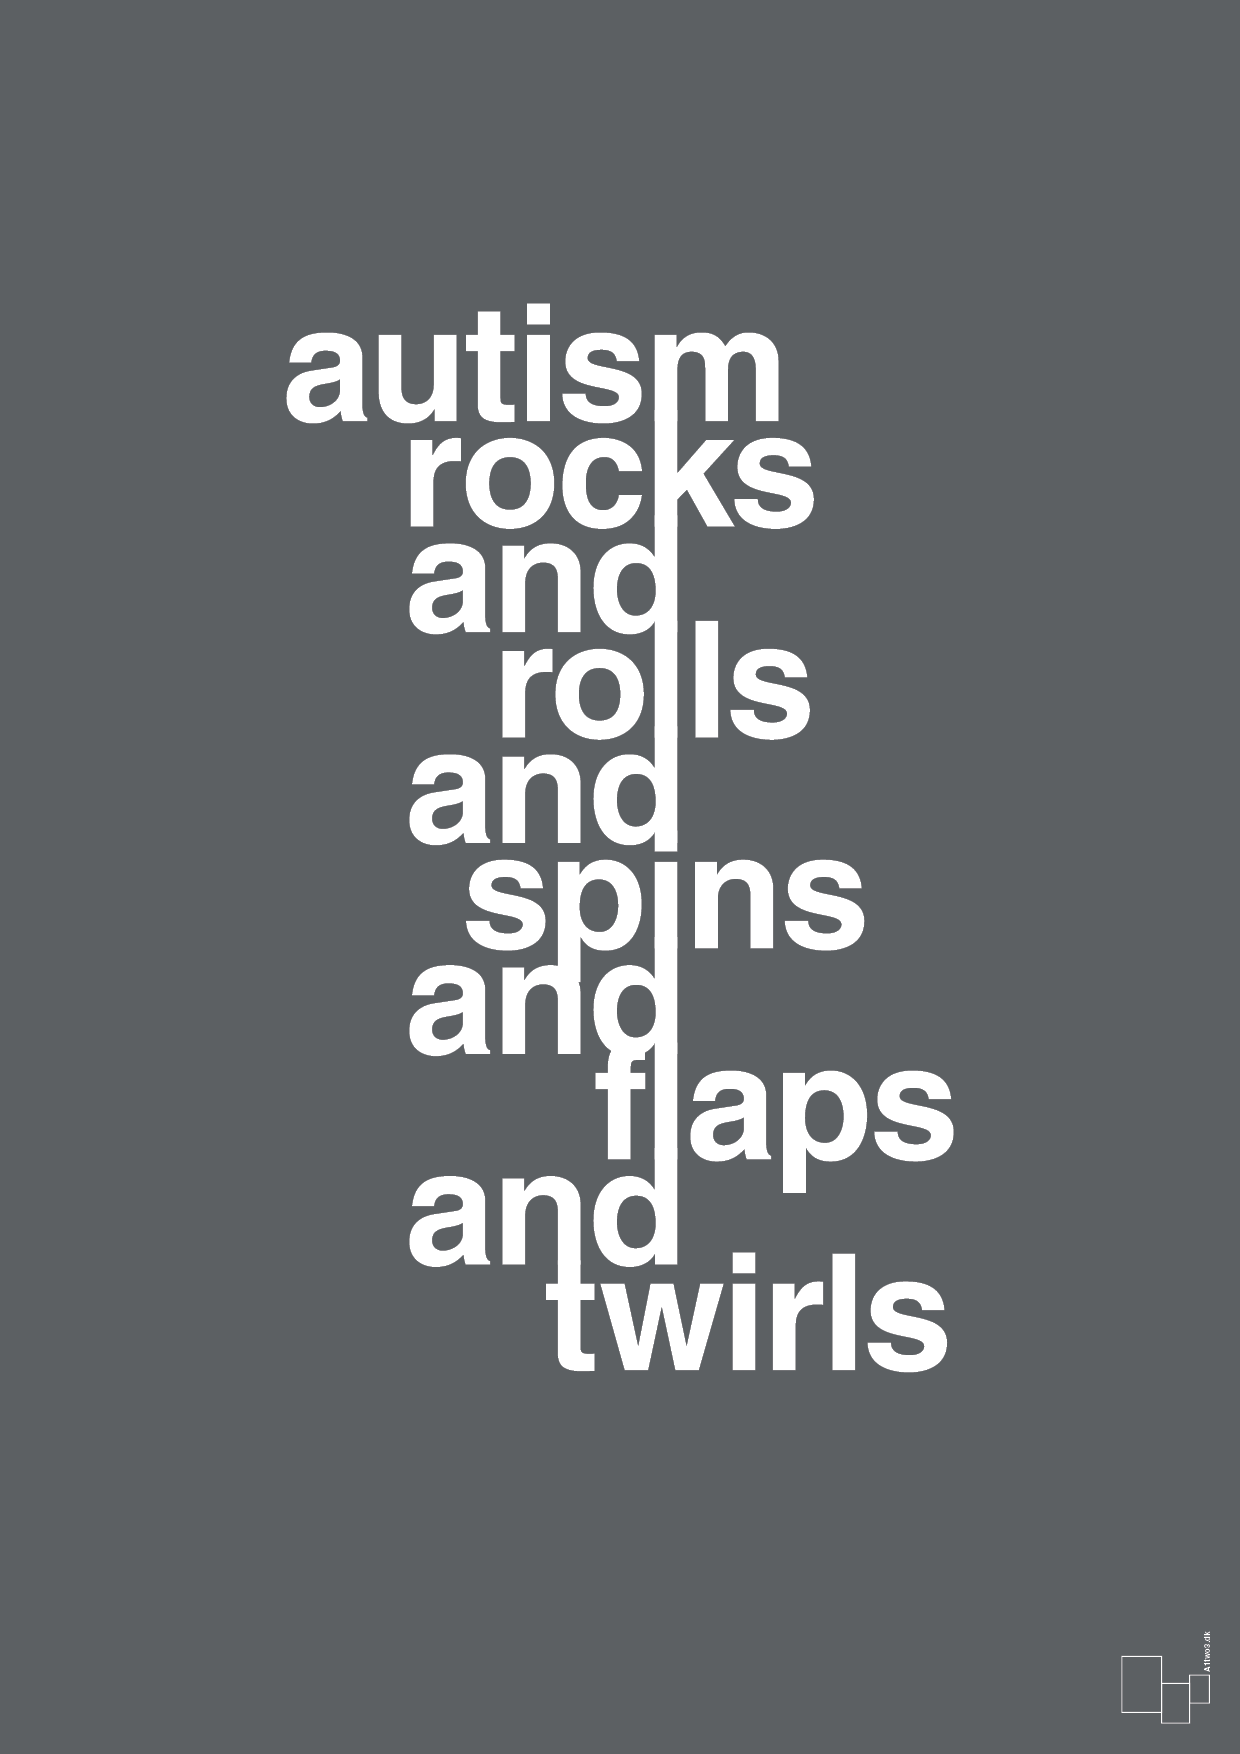 autism rocks and rolls and spins and flaps and twirls - Plakat med Samfund i Graphic Charcoal